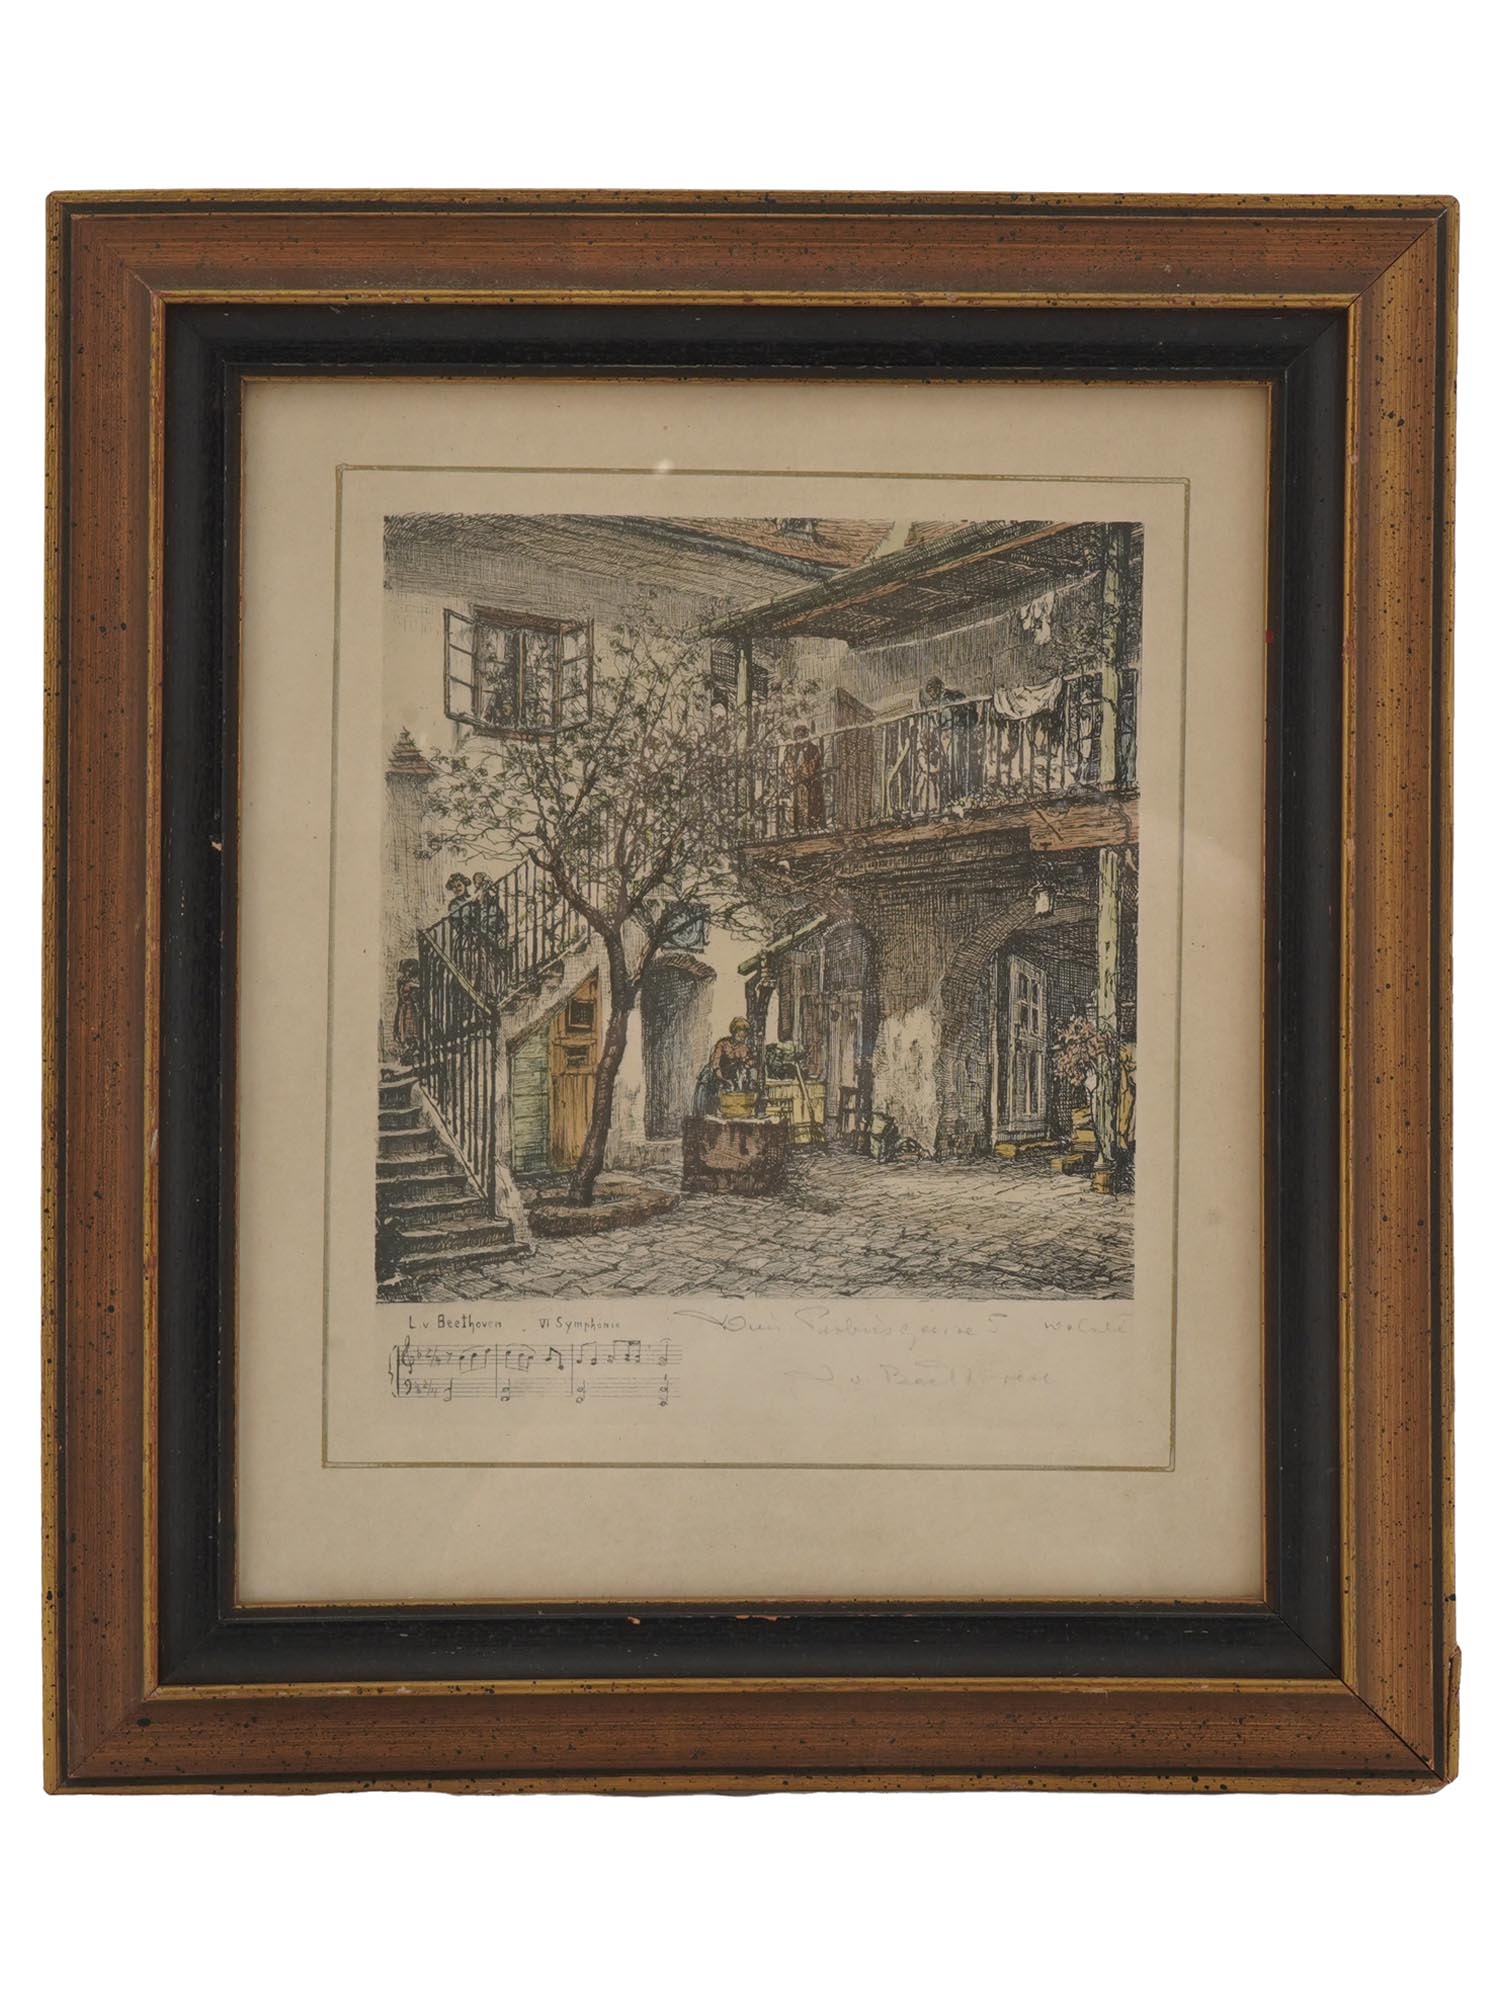 ANTIQUE COLORED ETCHING BEETHOVEN HOUSE, SIGNED PIC-0